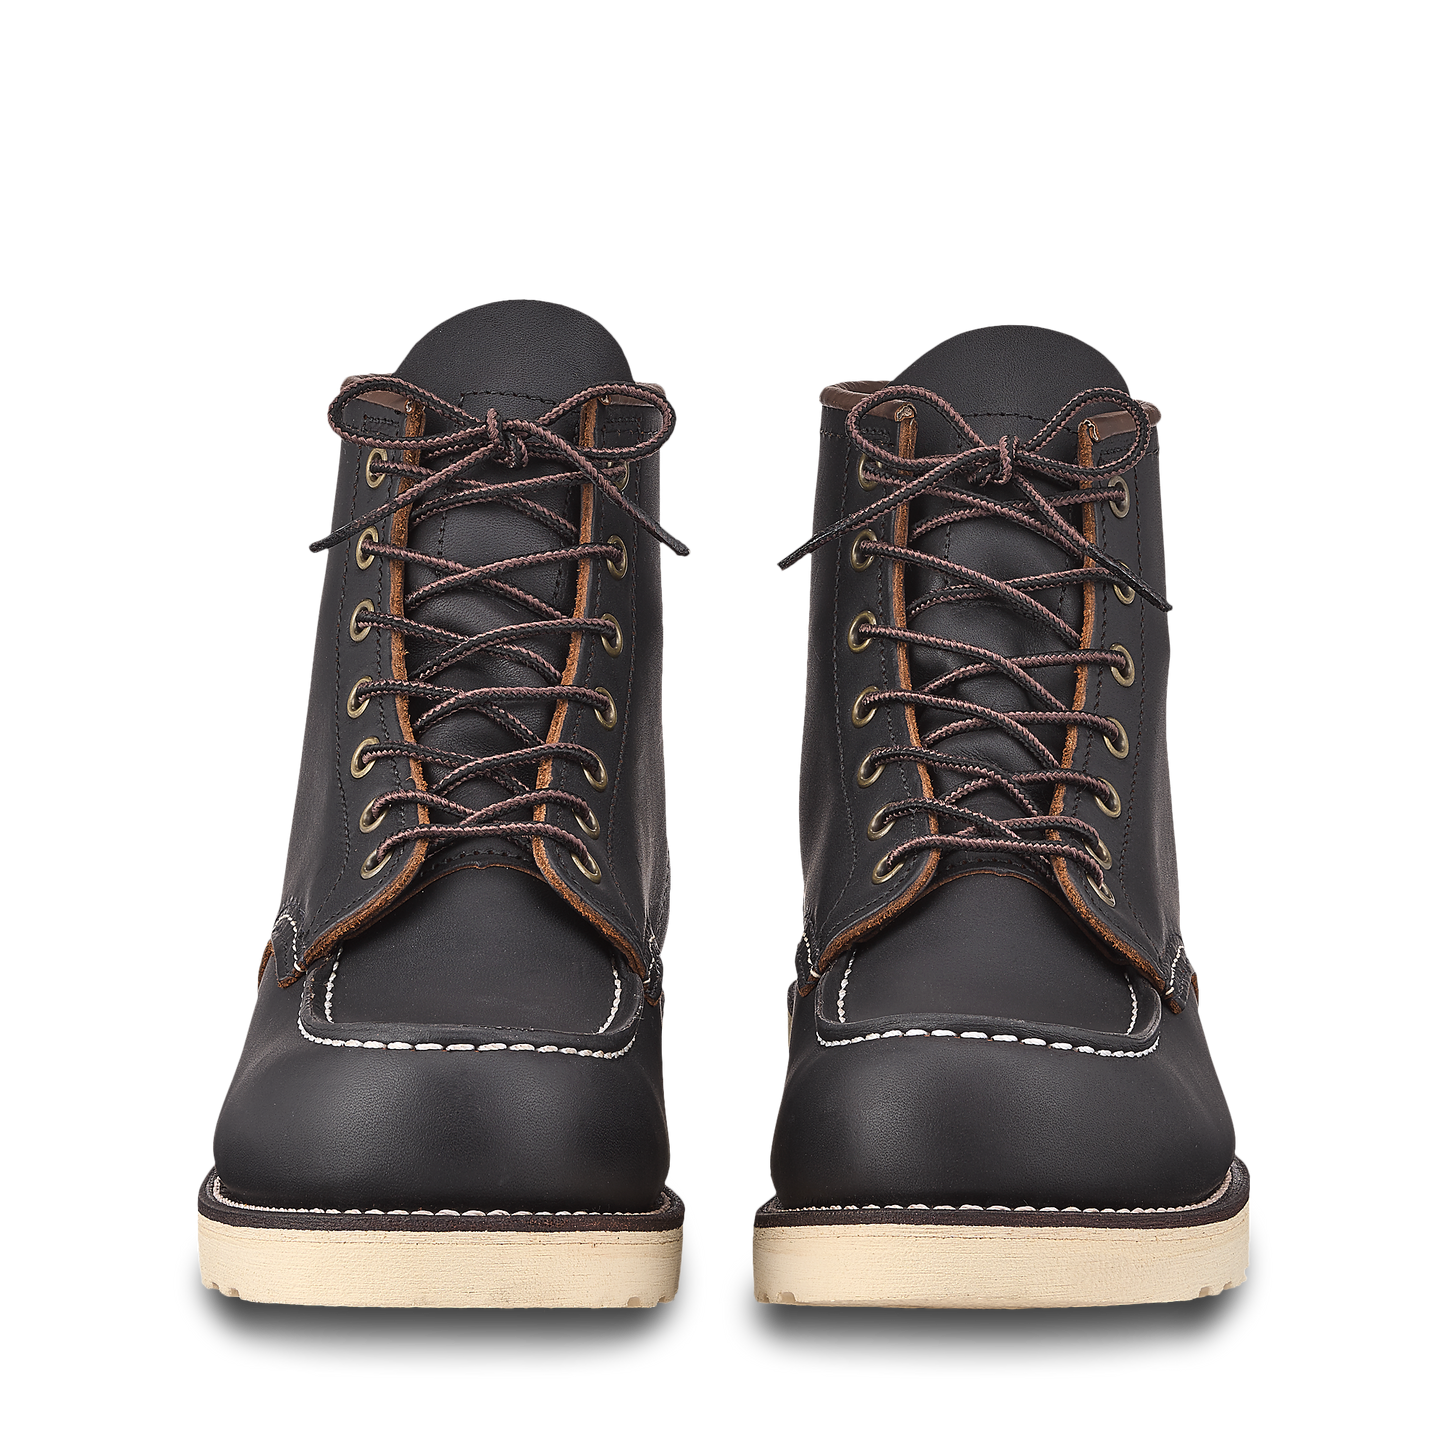 Red Wing 8849 Classic Moc Toe Boot